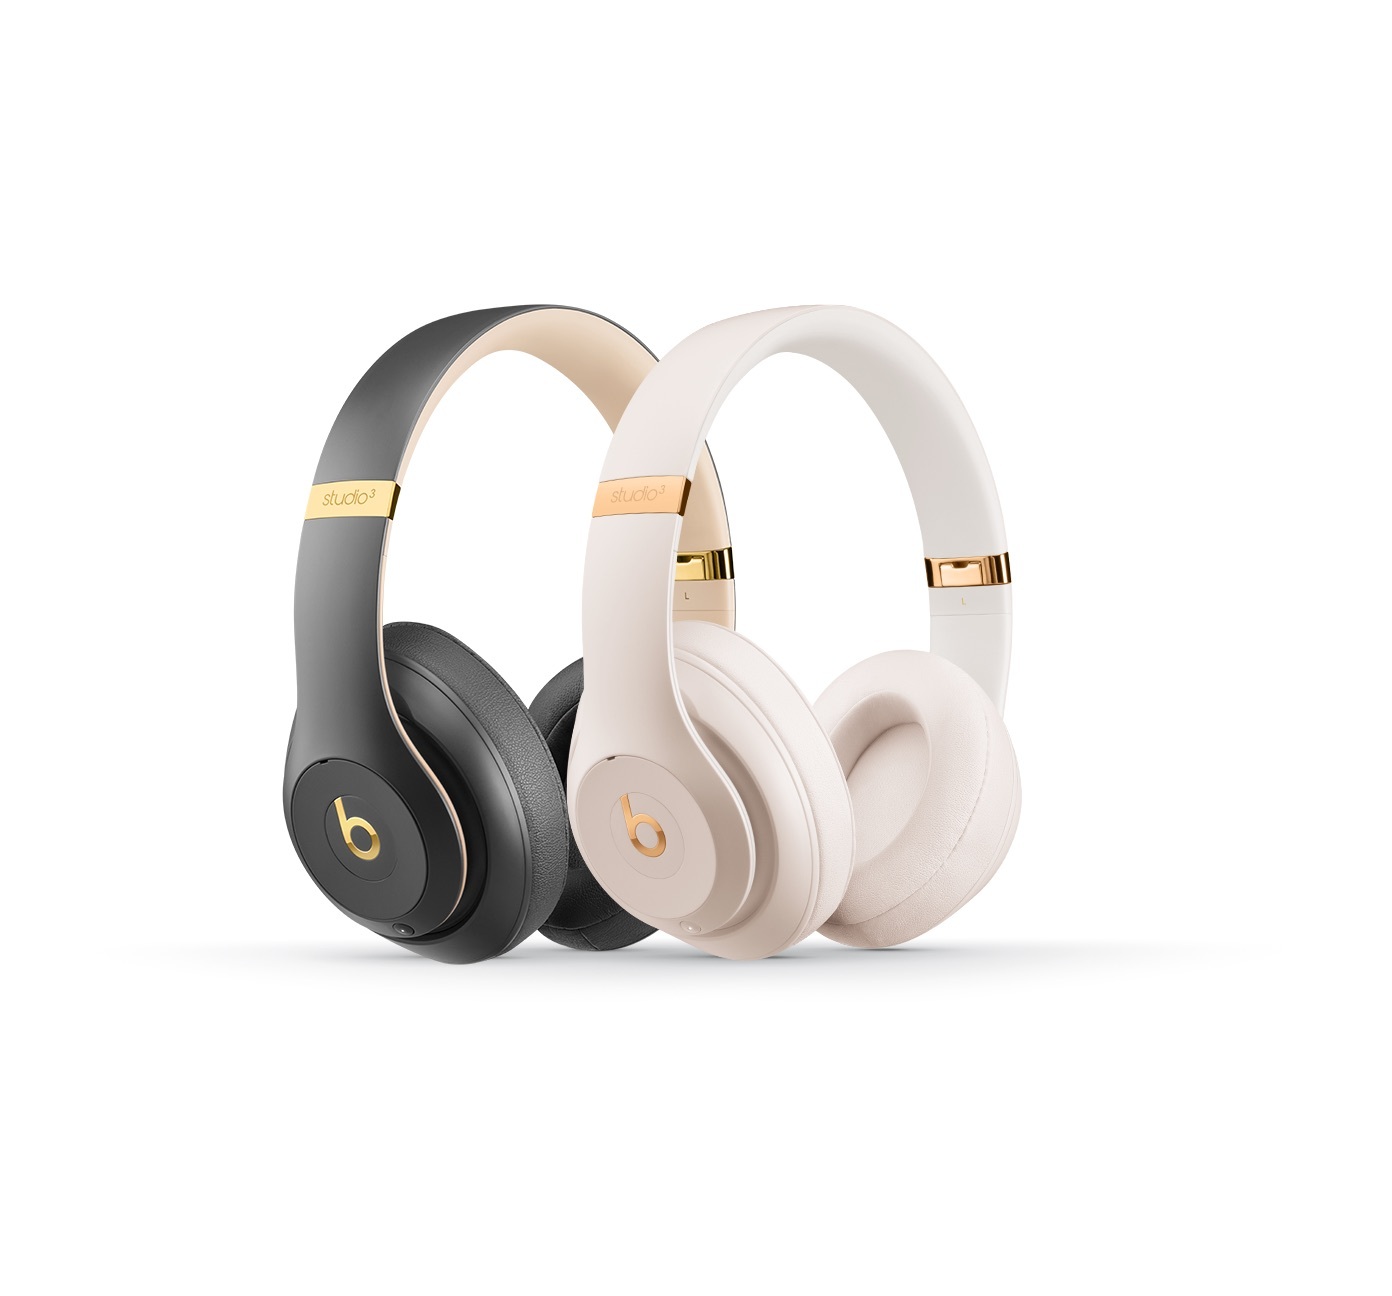 Beats by Dr. Dre Launches Its Most Advanced Headphone, Beats